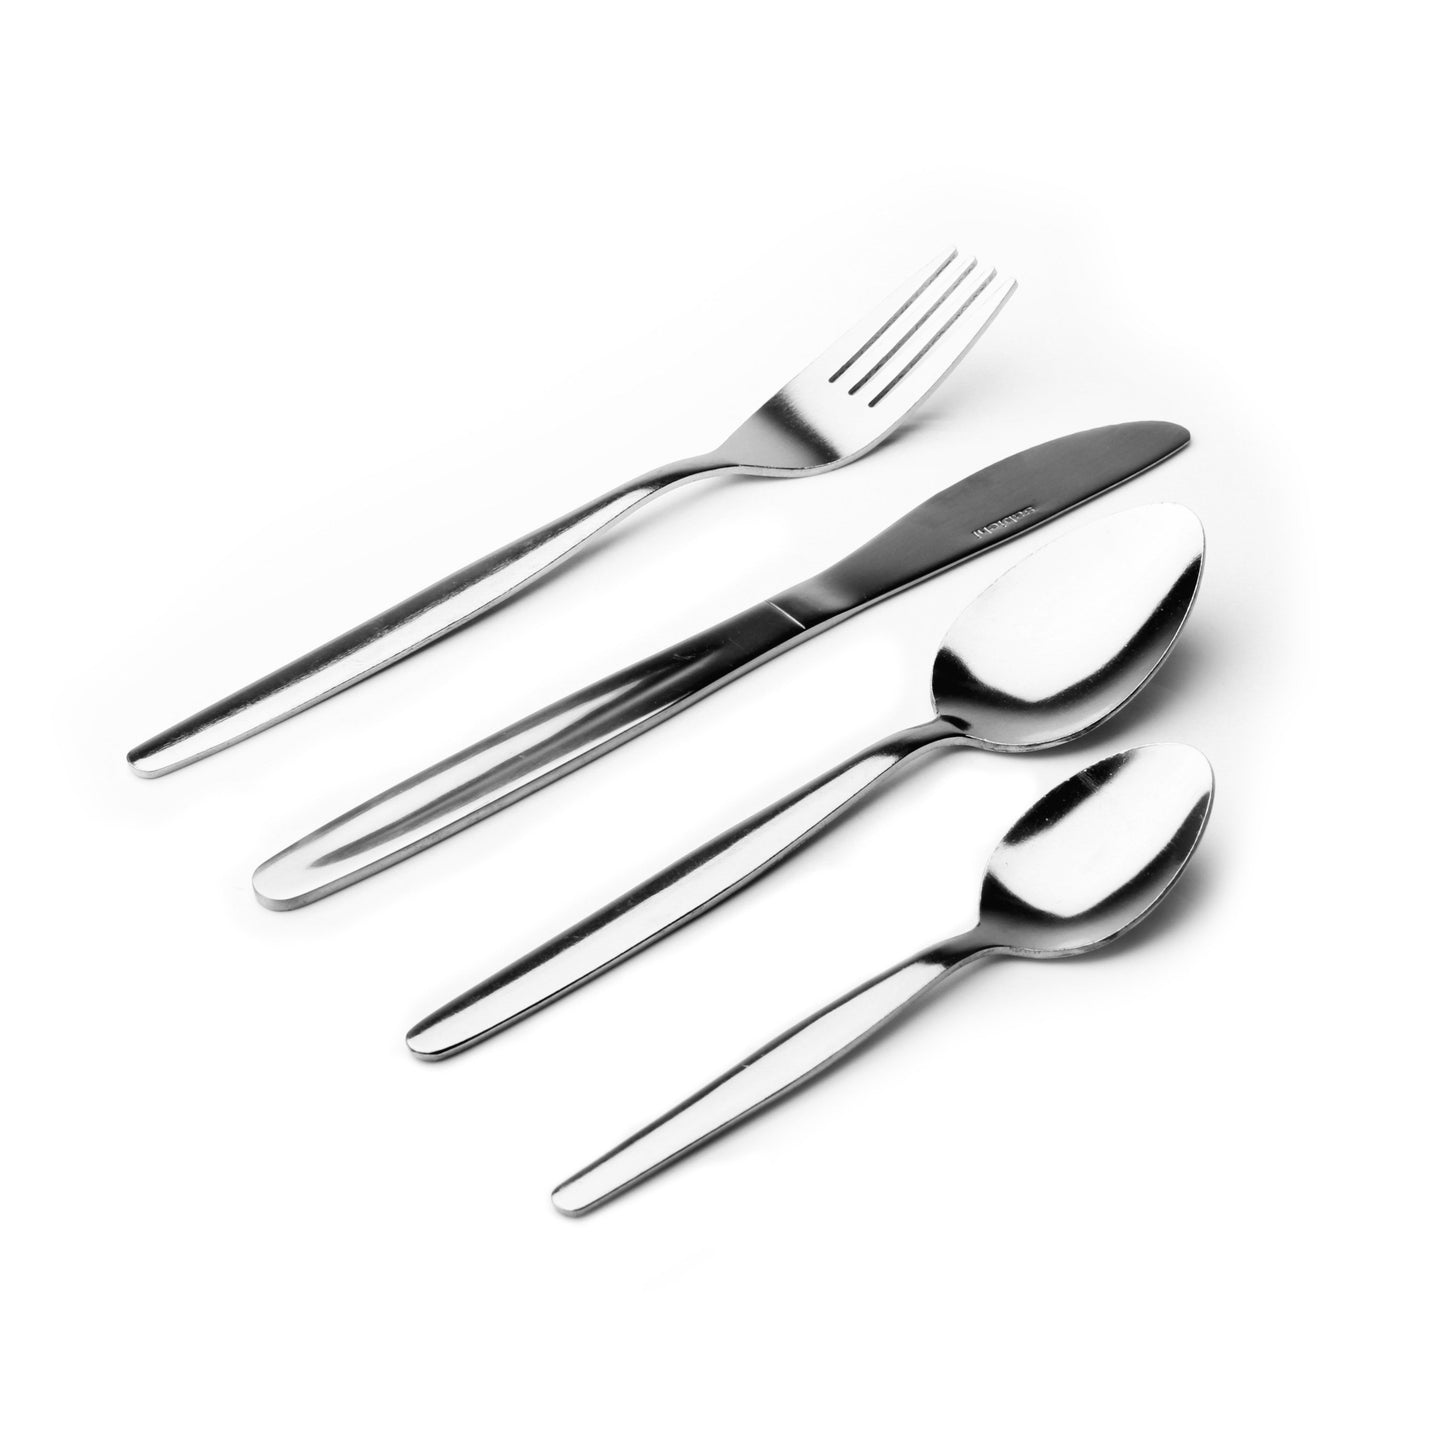 Sabichi Day to Day Stainless Steel 16pc Cutlery Set